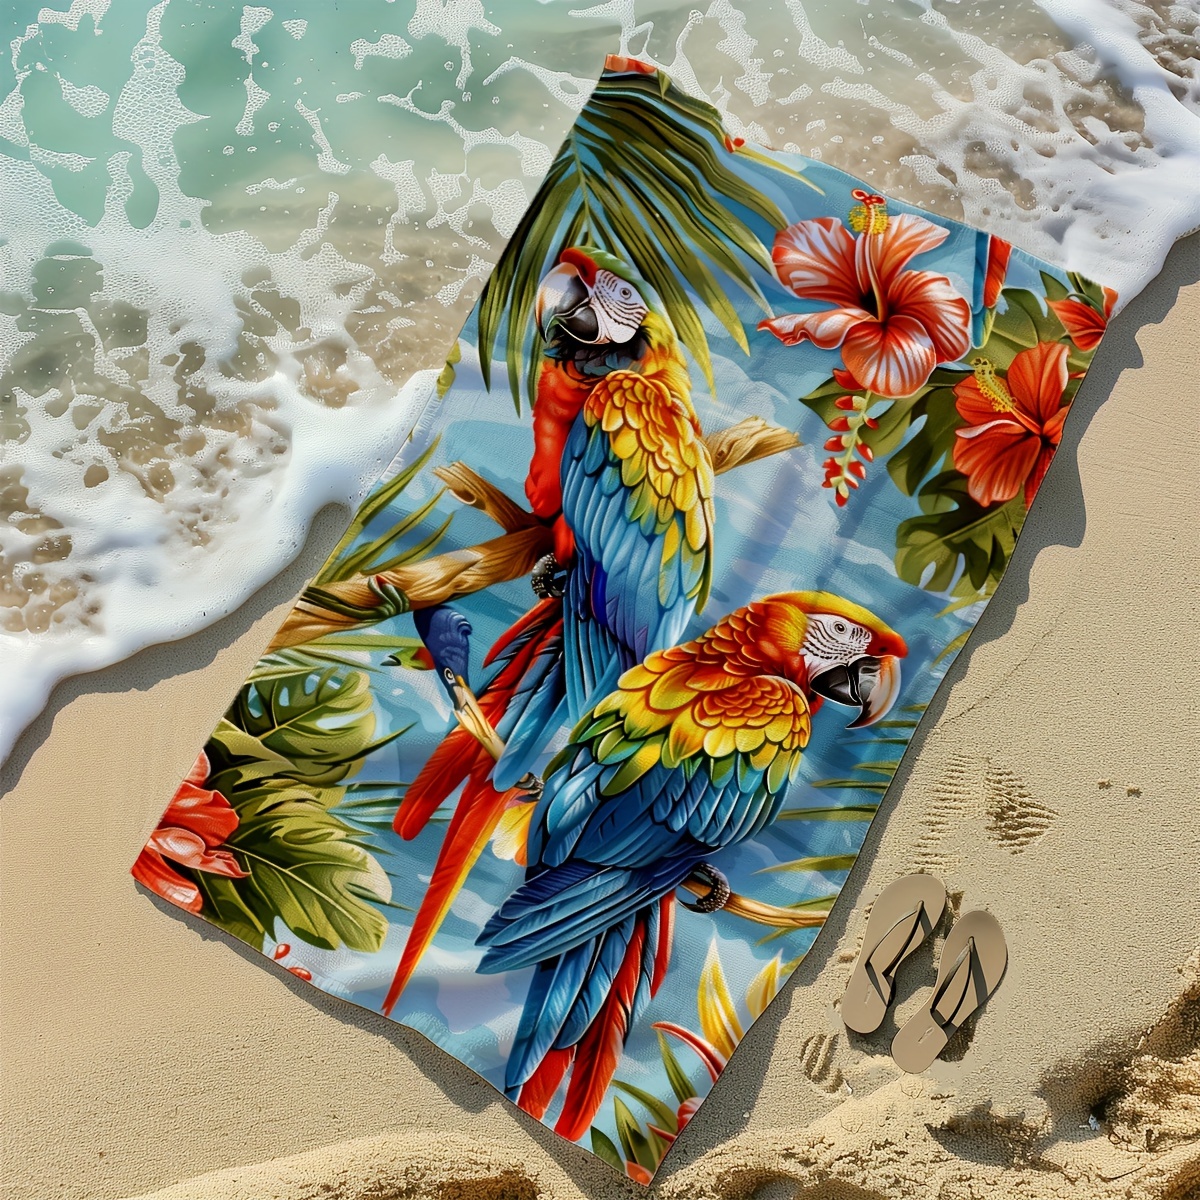 

Tropical Parrot Print Beach Towel 35.43 X 70.87 Inches, Quick-dry Microfiber, Lightweight, Soft, Absorbent, Modern Style, For Pool, Travel, Outdoor Activities